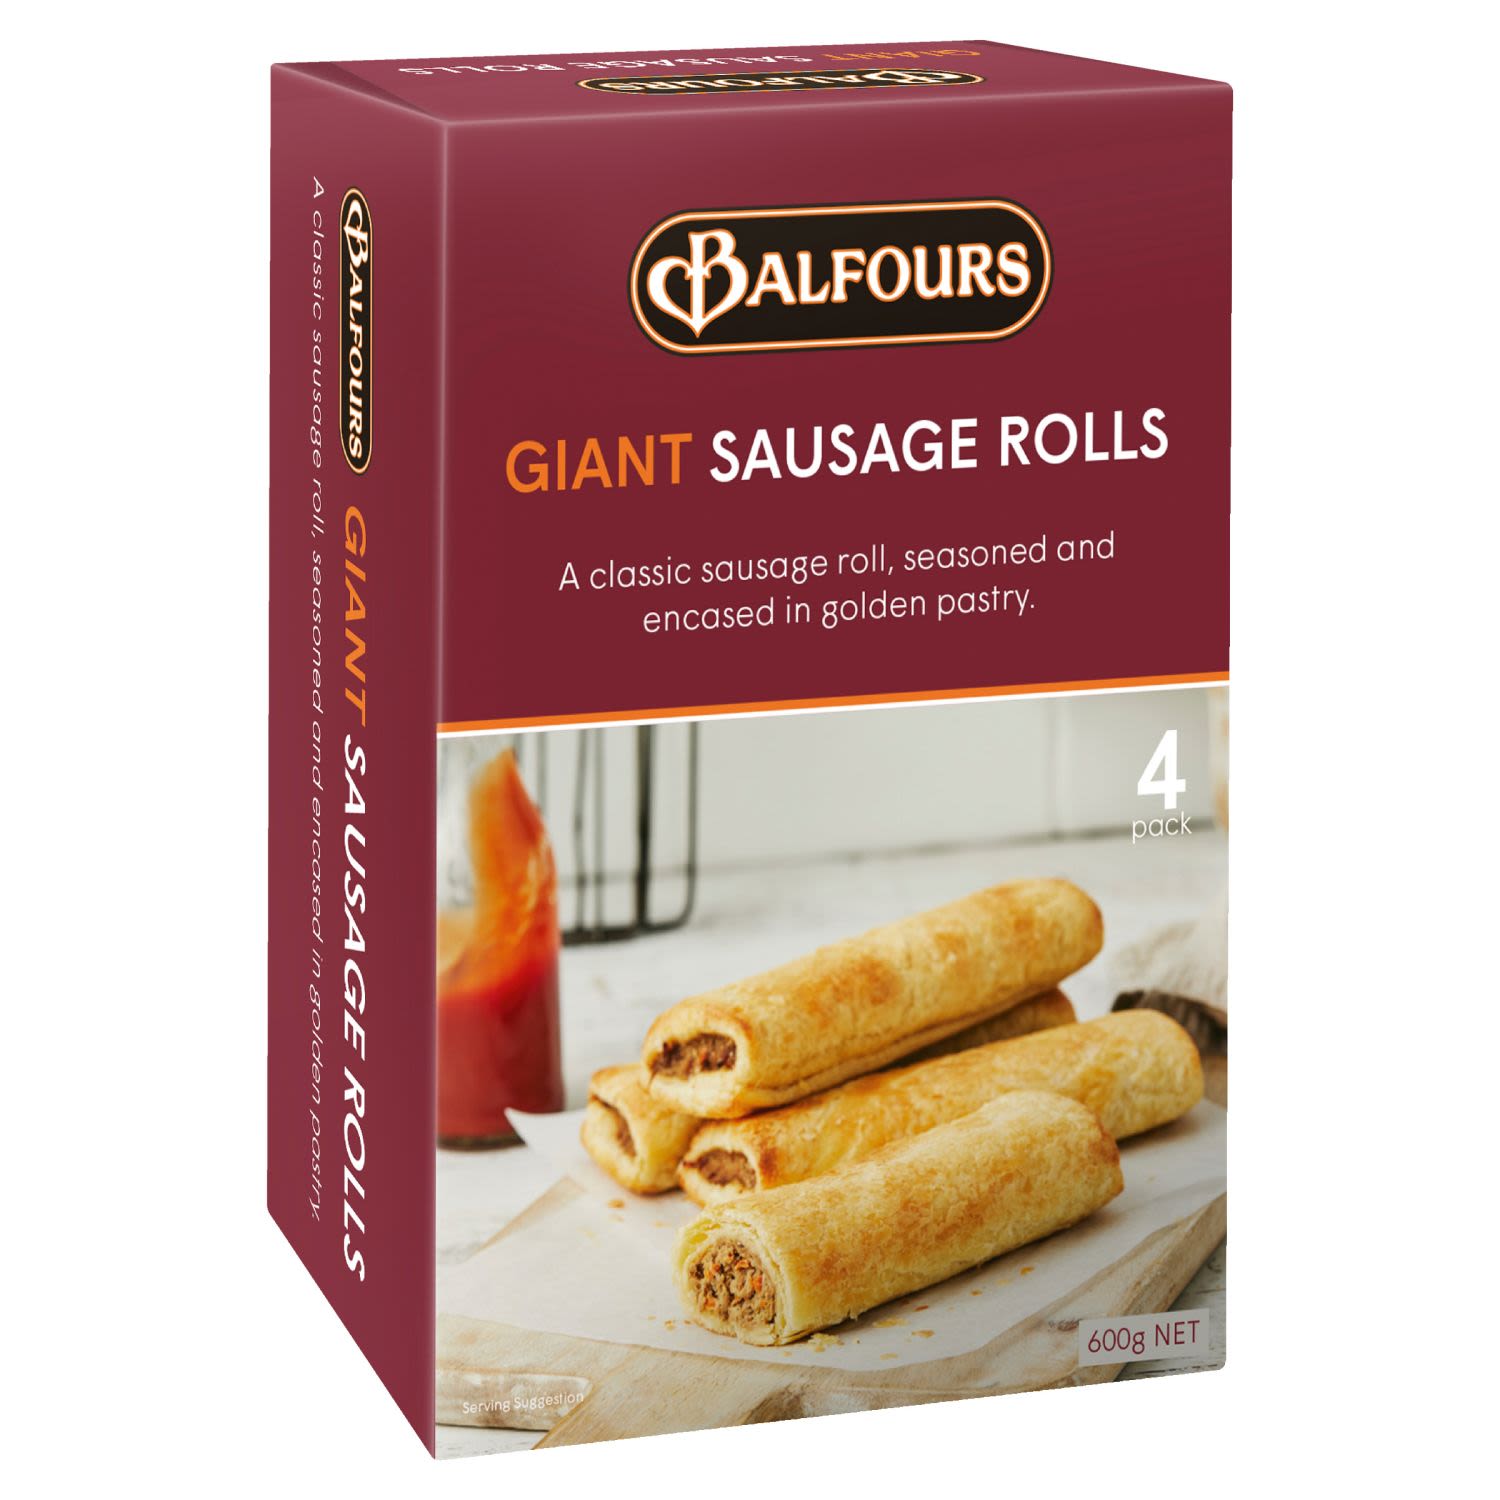 Balfours Giant Sausage Rolls, 4 Each